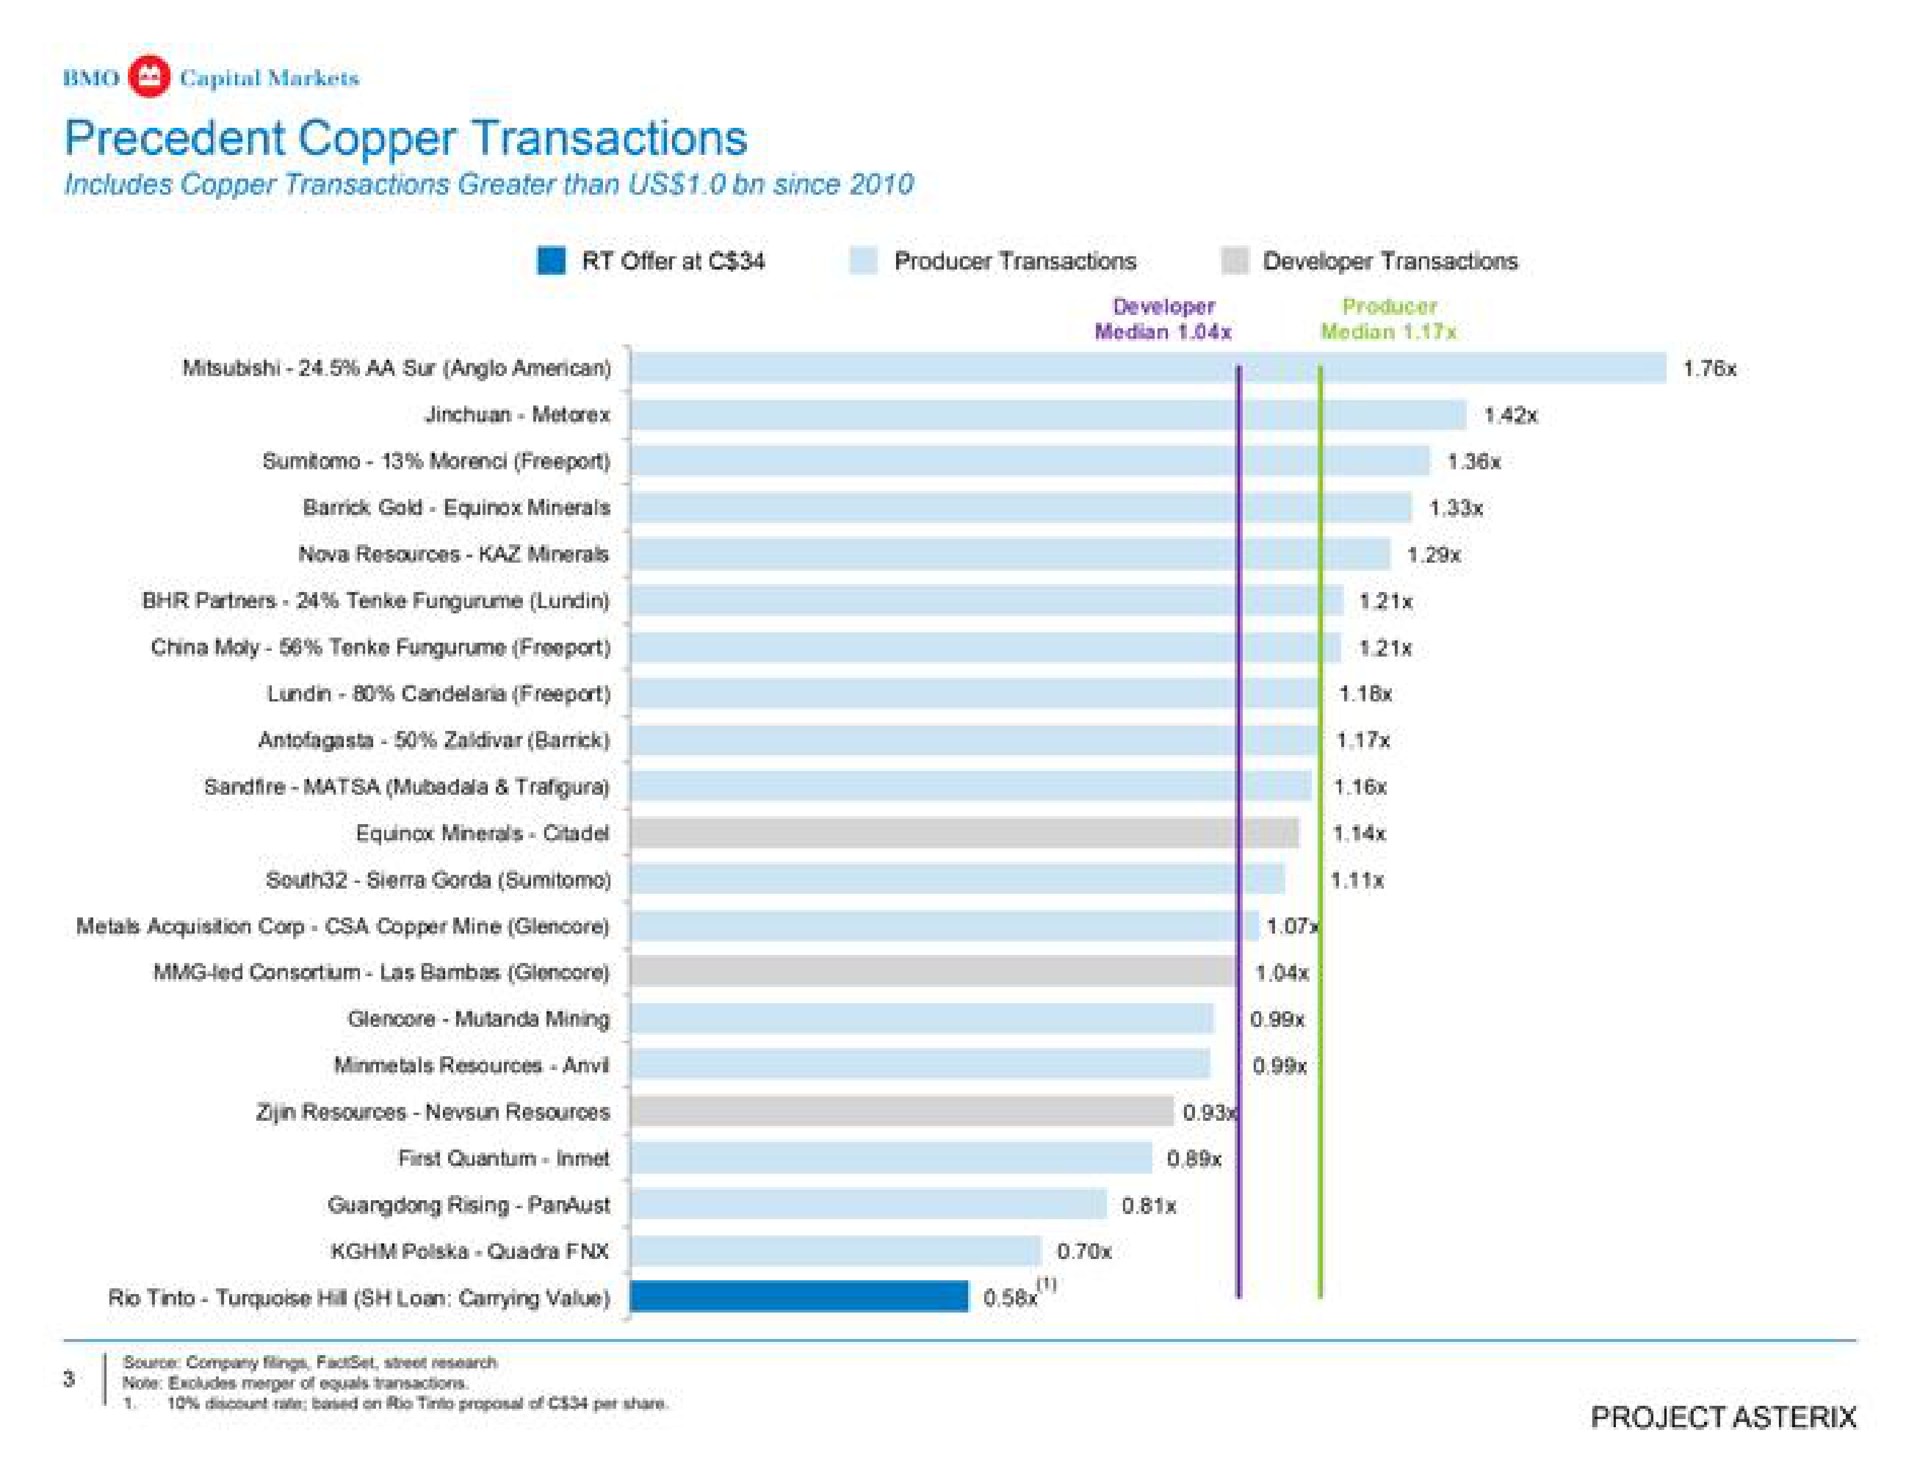 precedent copper transactions rio turquoise hill loan carrying valve i | BMO Capital Markets